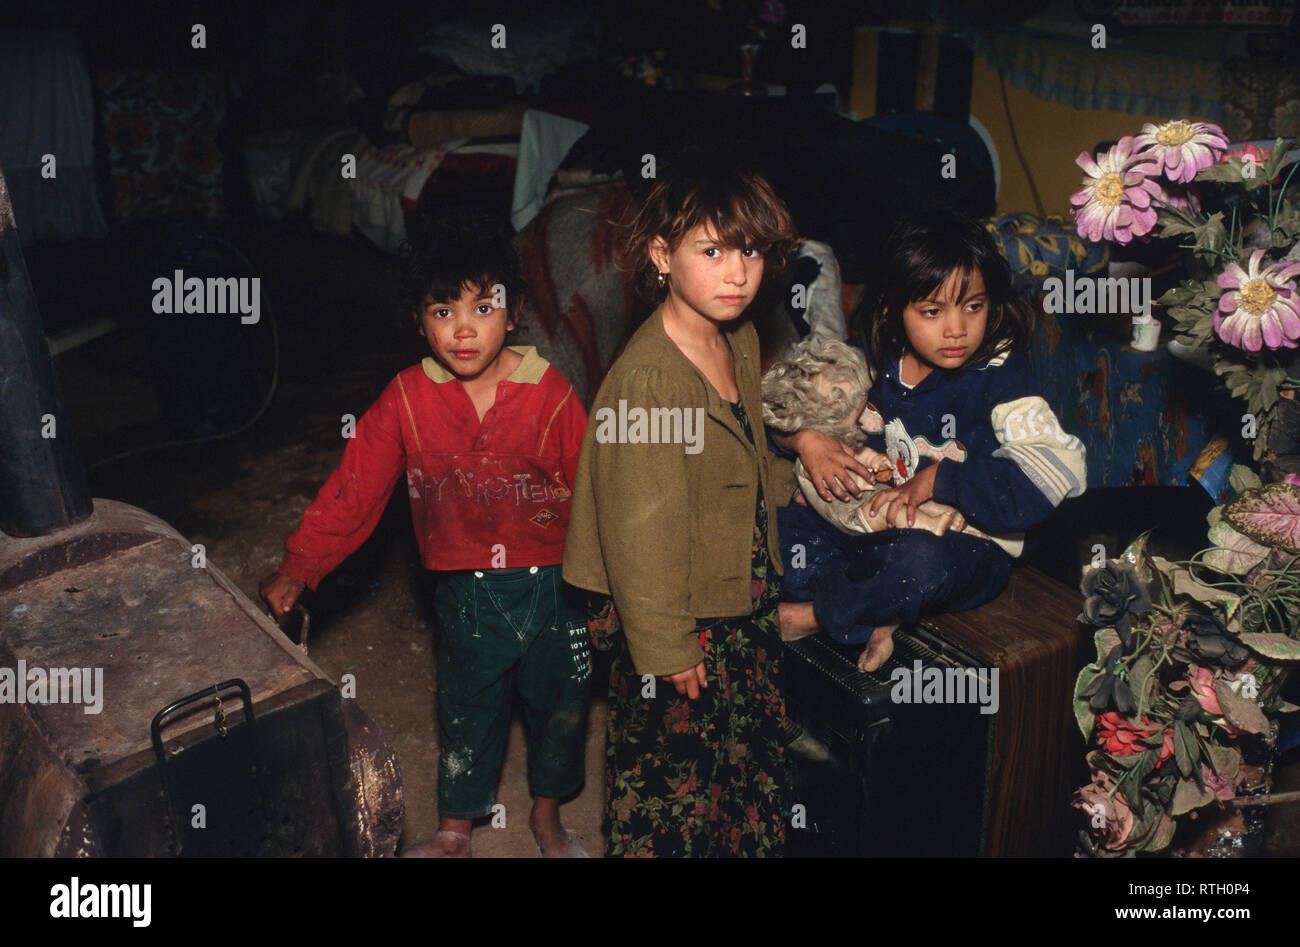 Gypsy children at home in their shack of wood and plastic sheeting, Aspropyrgos gypsy camp, Athens, Greece. Stock Photo